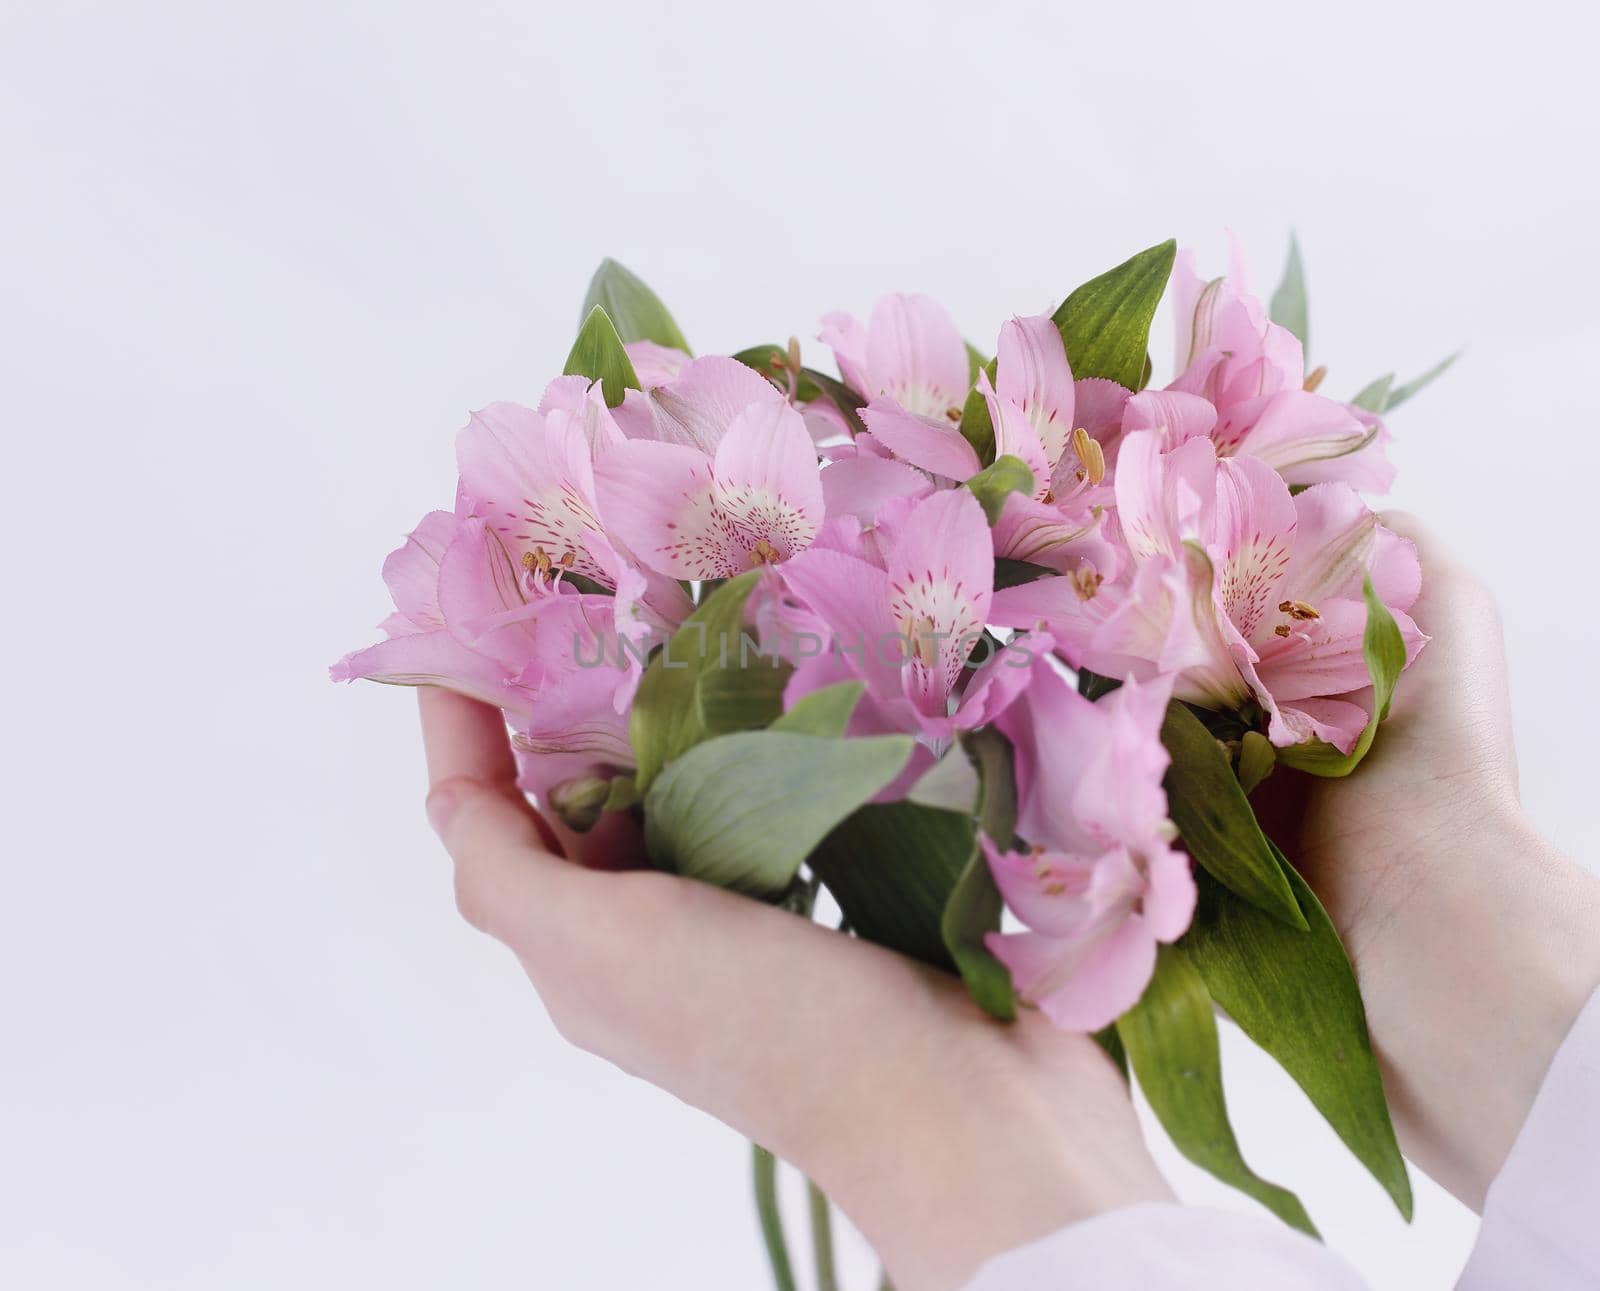 bouquet of flowers in female hands isolated on a light background by SmartPhotoLab